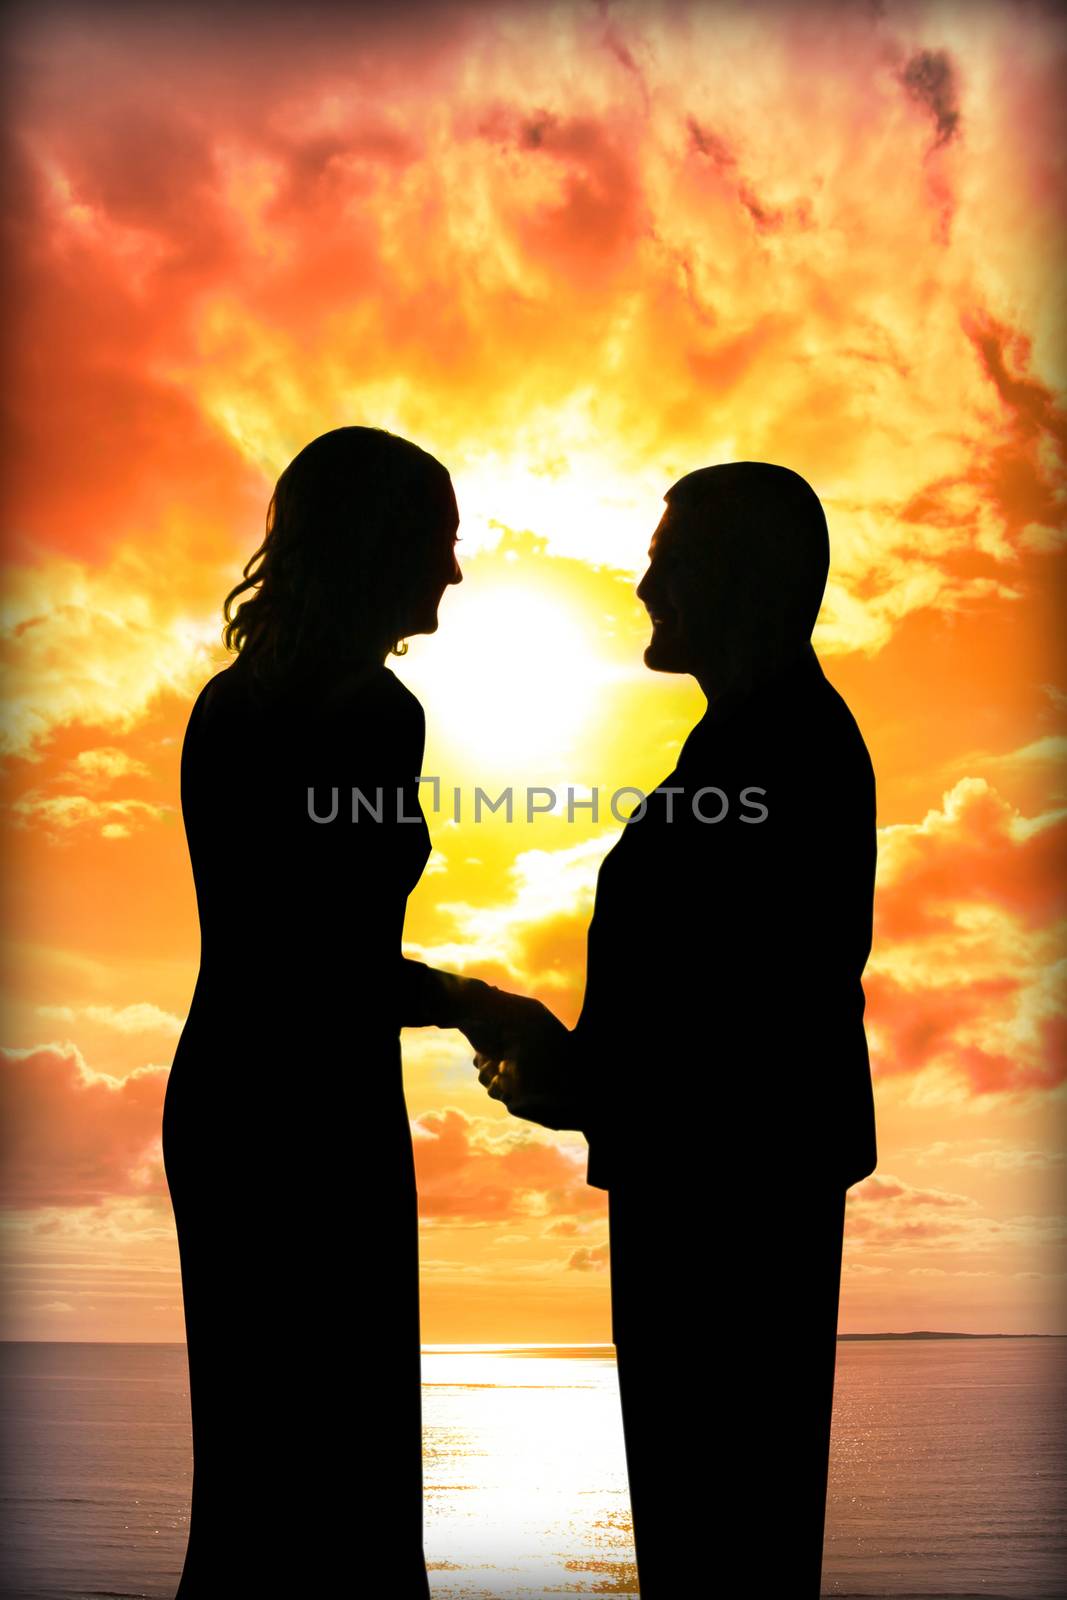 young loving couple holding hands in silhouette at sunset gazing into each others eyes